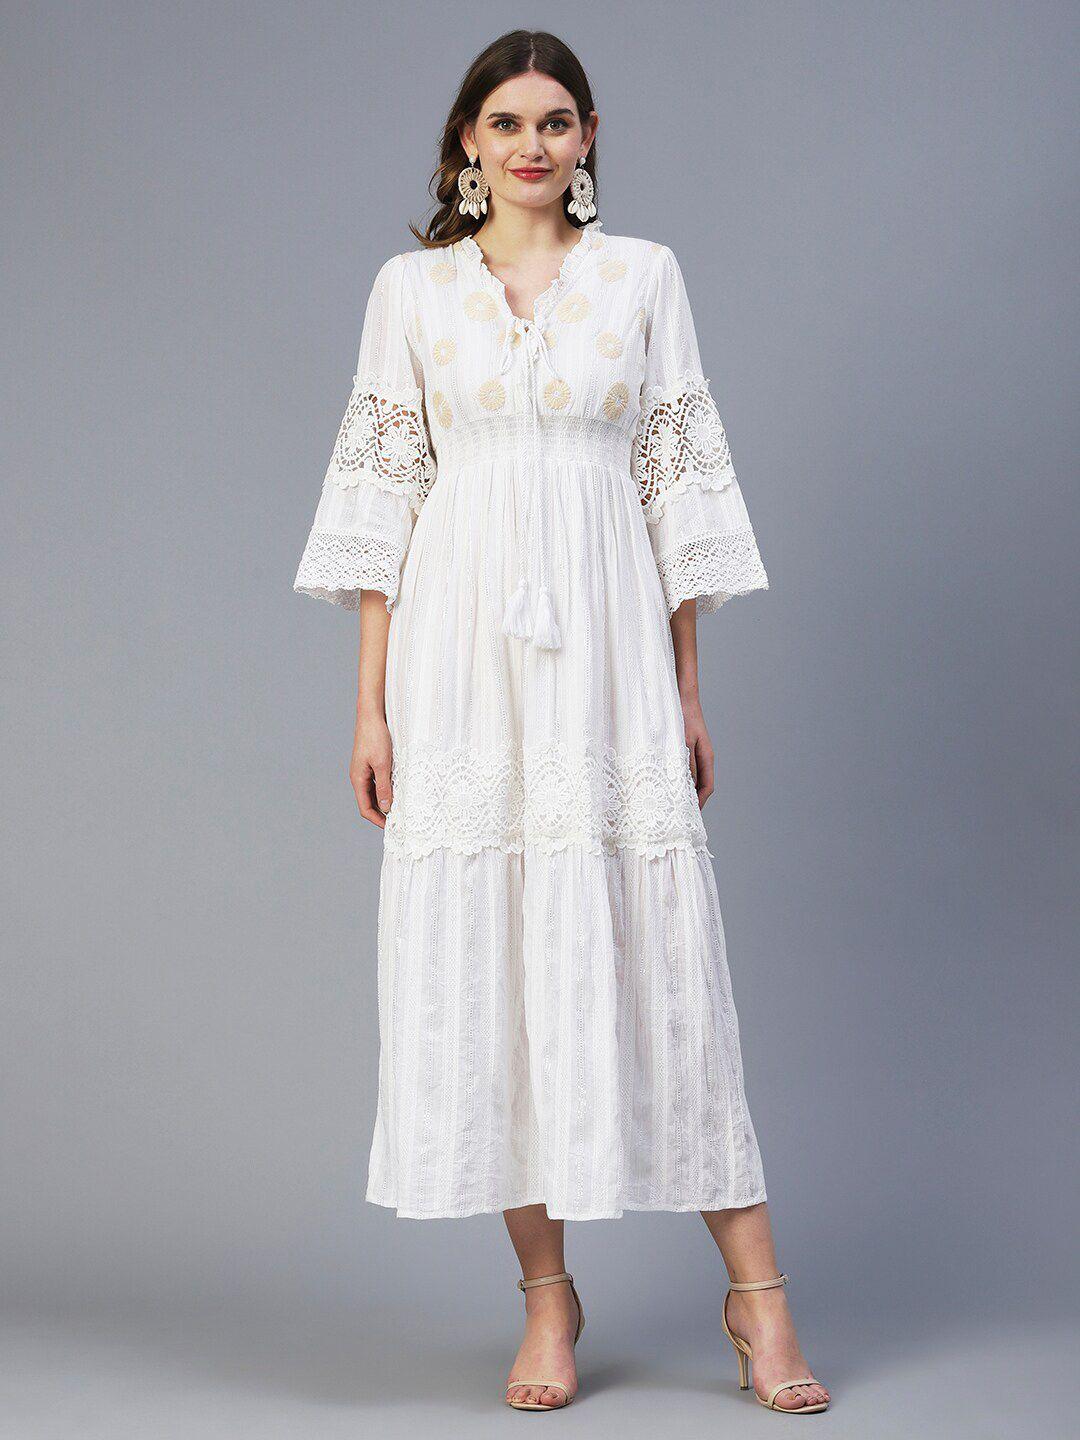 fashor white floral embroidered tie-up neck a-line cotton dress